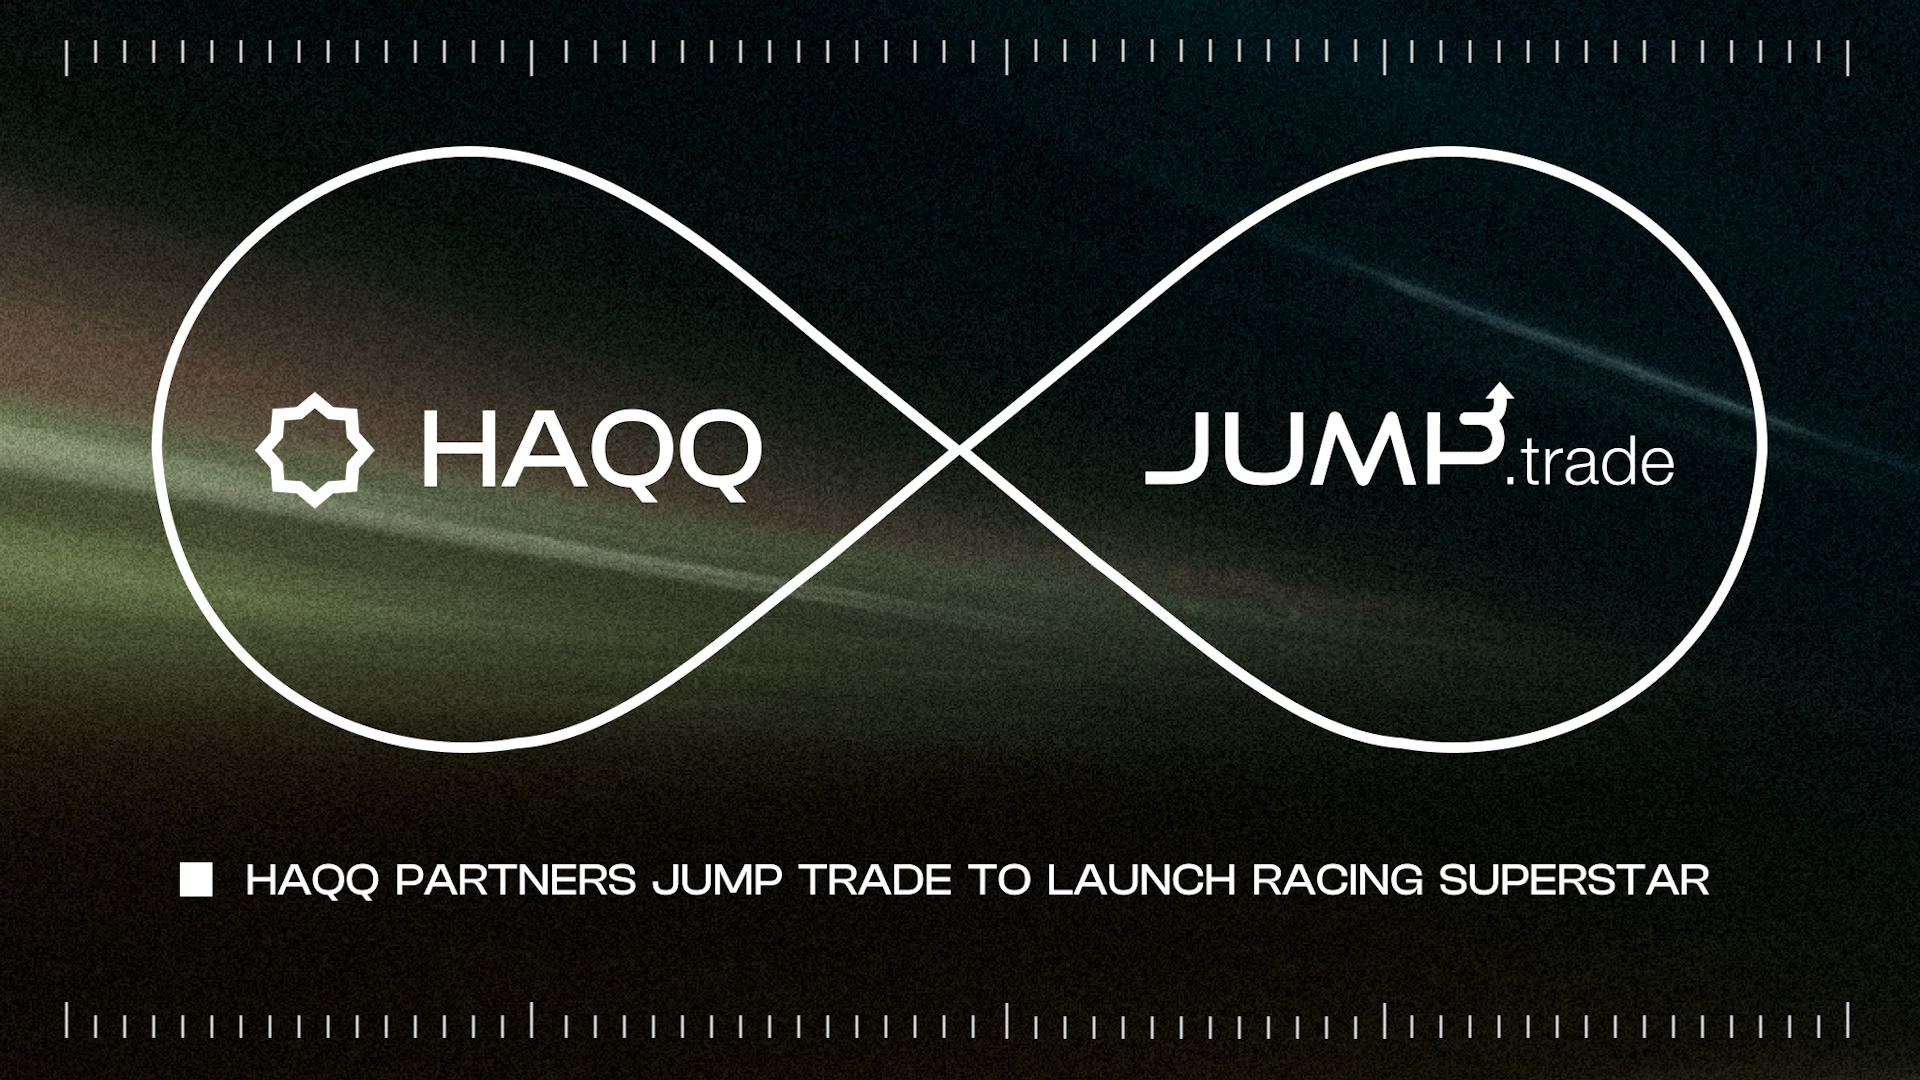 HAQQ Partners Jump Trade to Launch Racing Superstar